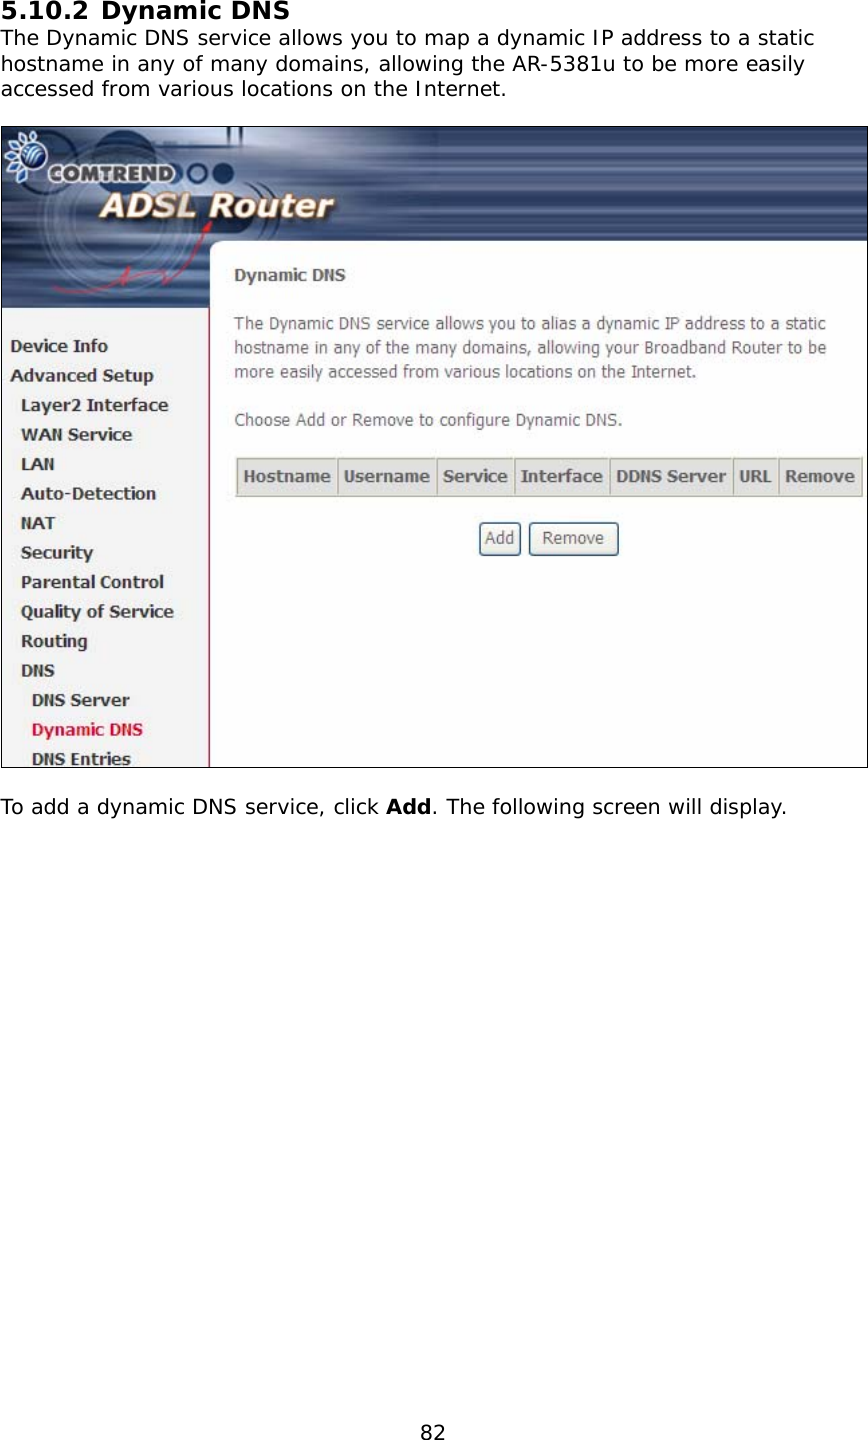  82   5.10.2 Dynamic DNS The Dynamic DNS service allows you to map a dynamic IP address to a static hostname in any of many domains, allowing the AR-5381u to be more easily accessed from various locations on the Internet.    To add a dynamic DNS service, click Add. The following screen will display.  